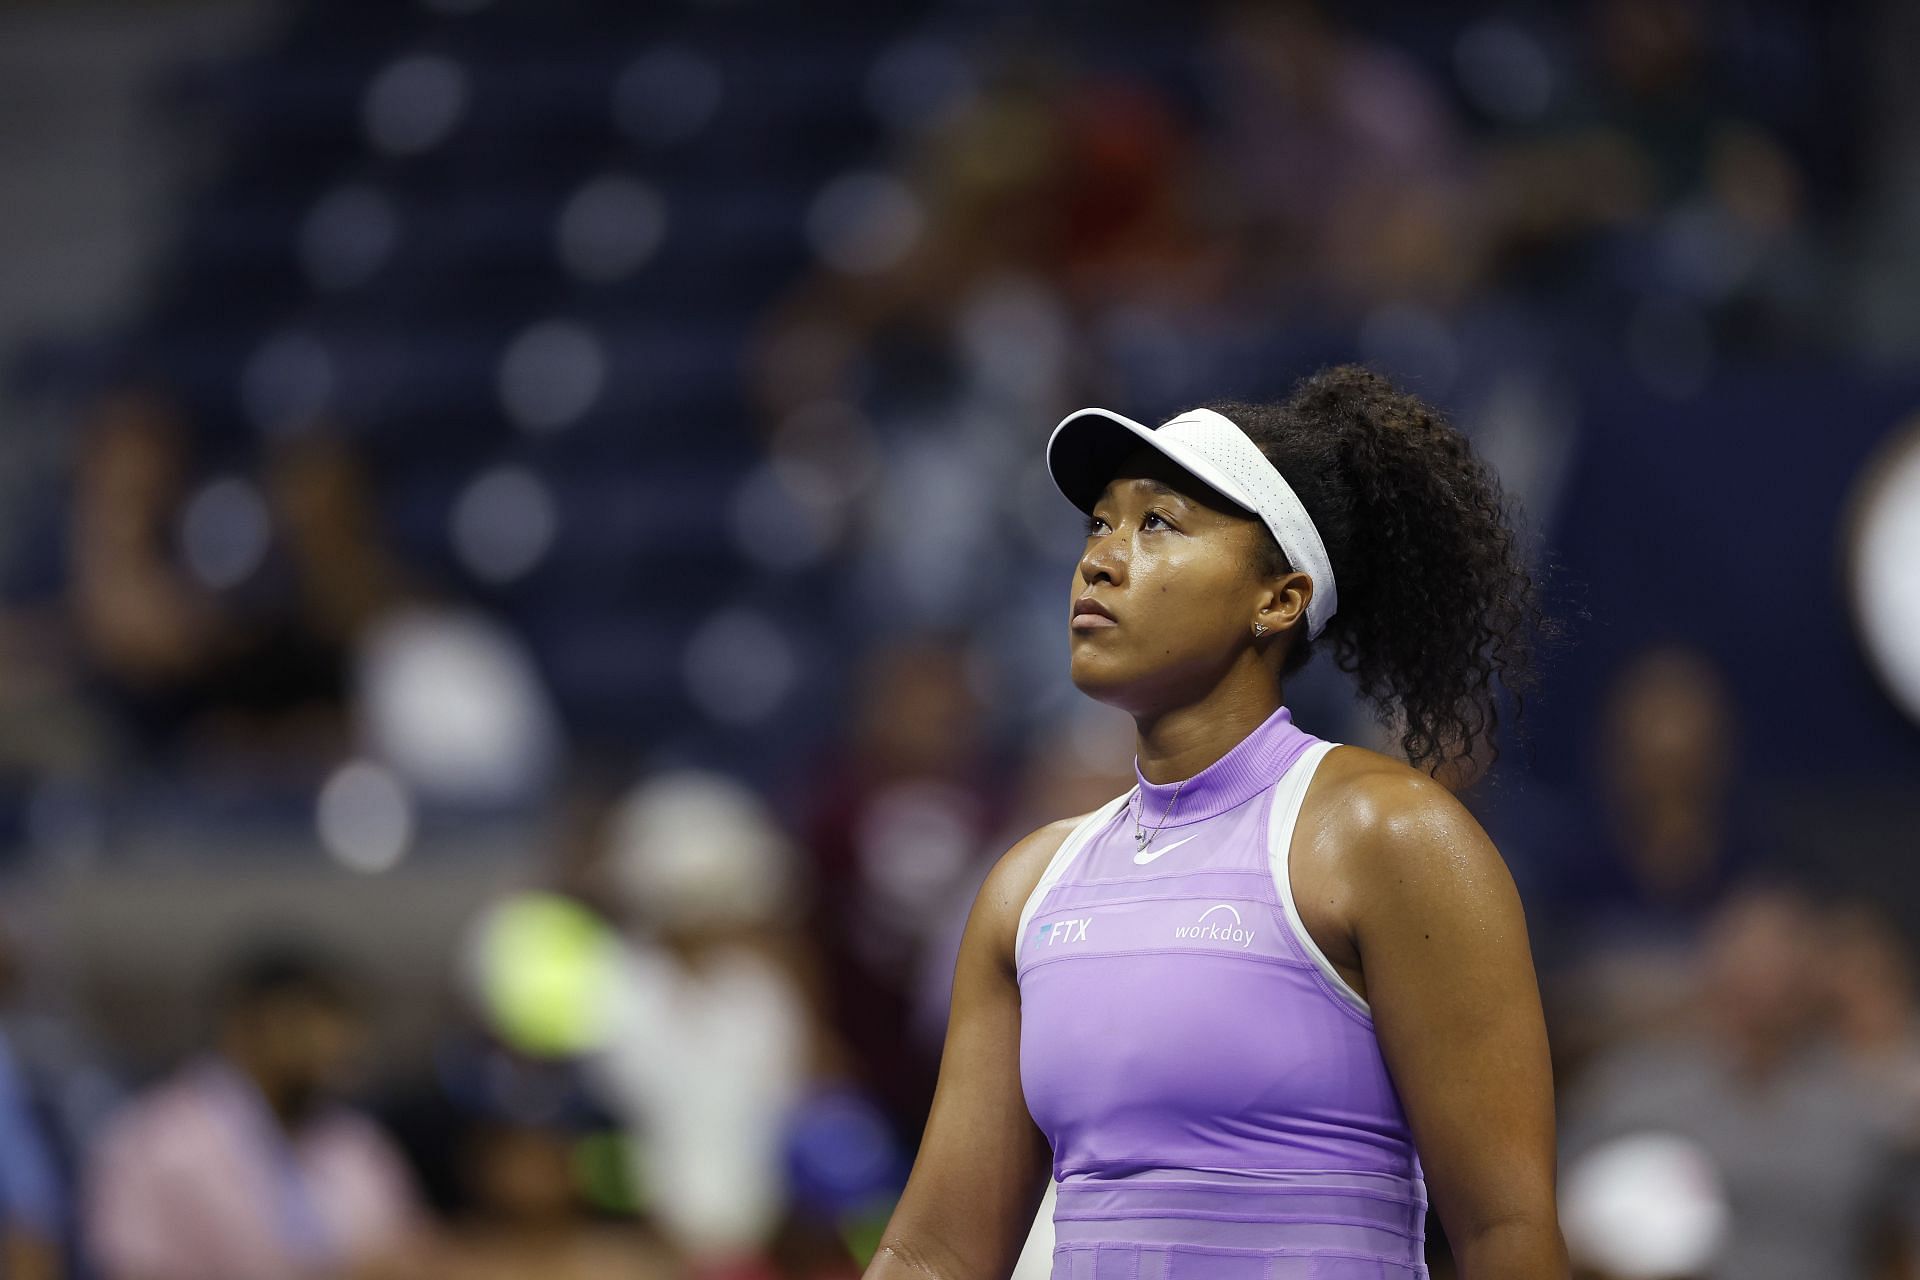 Naomi Osaka made an early exit at the 2022 US Open.